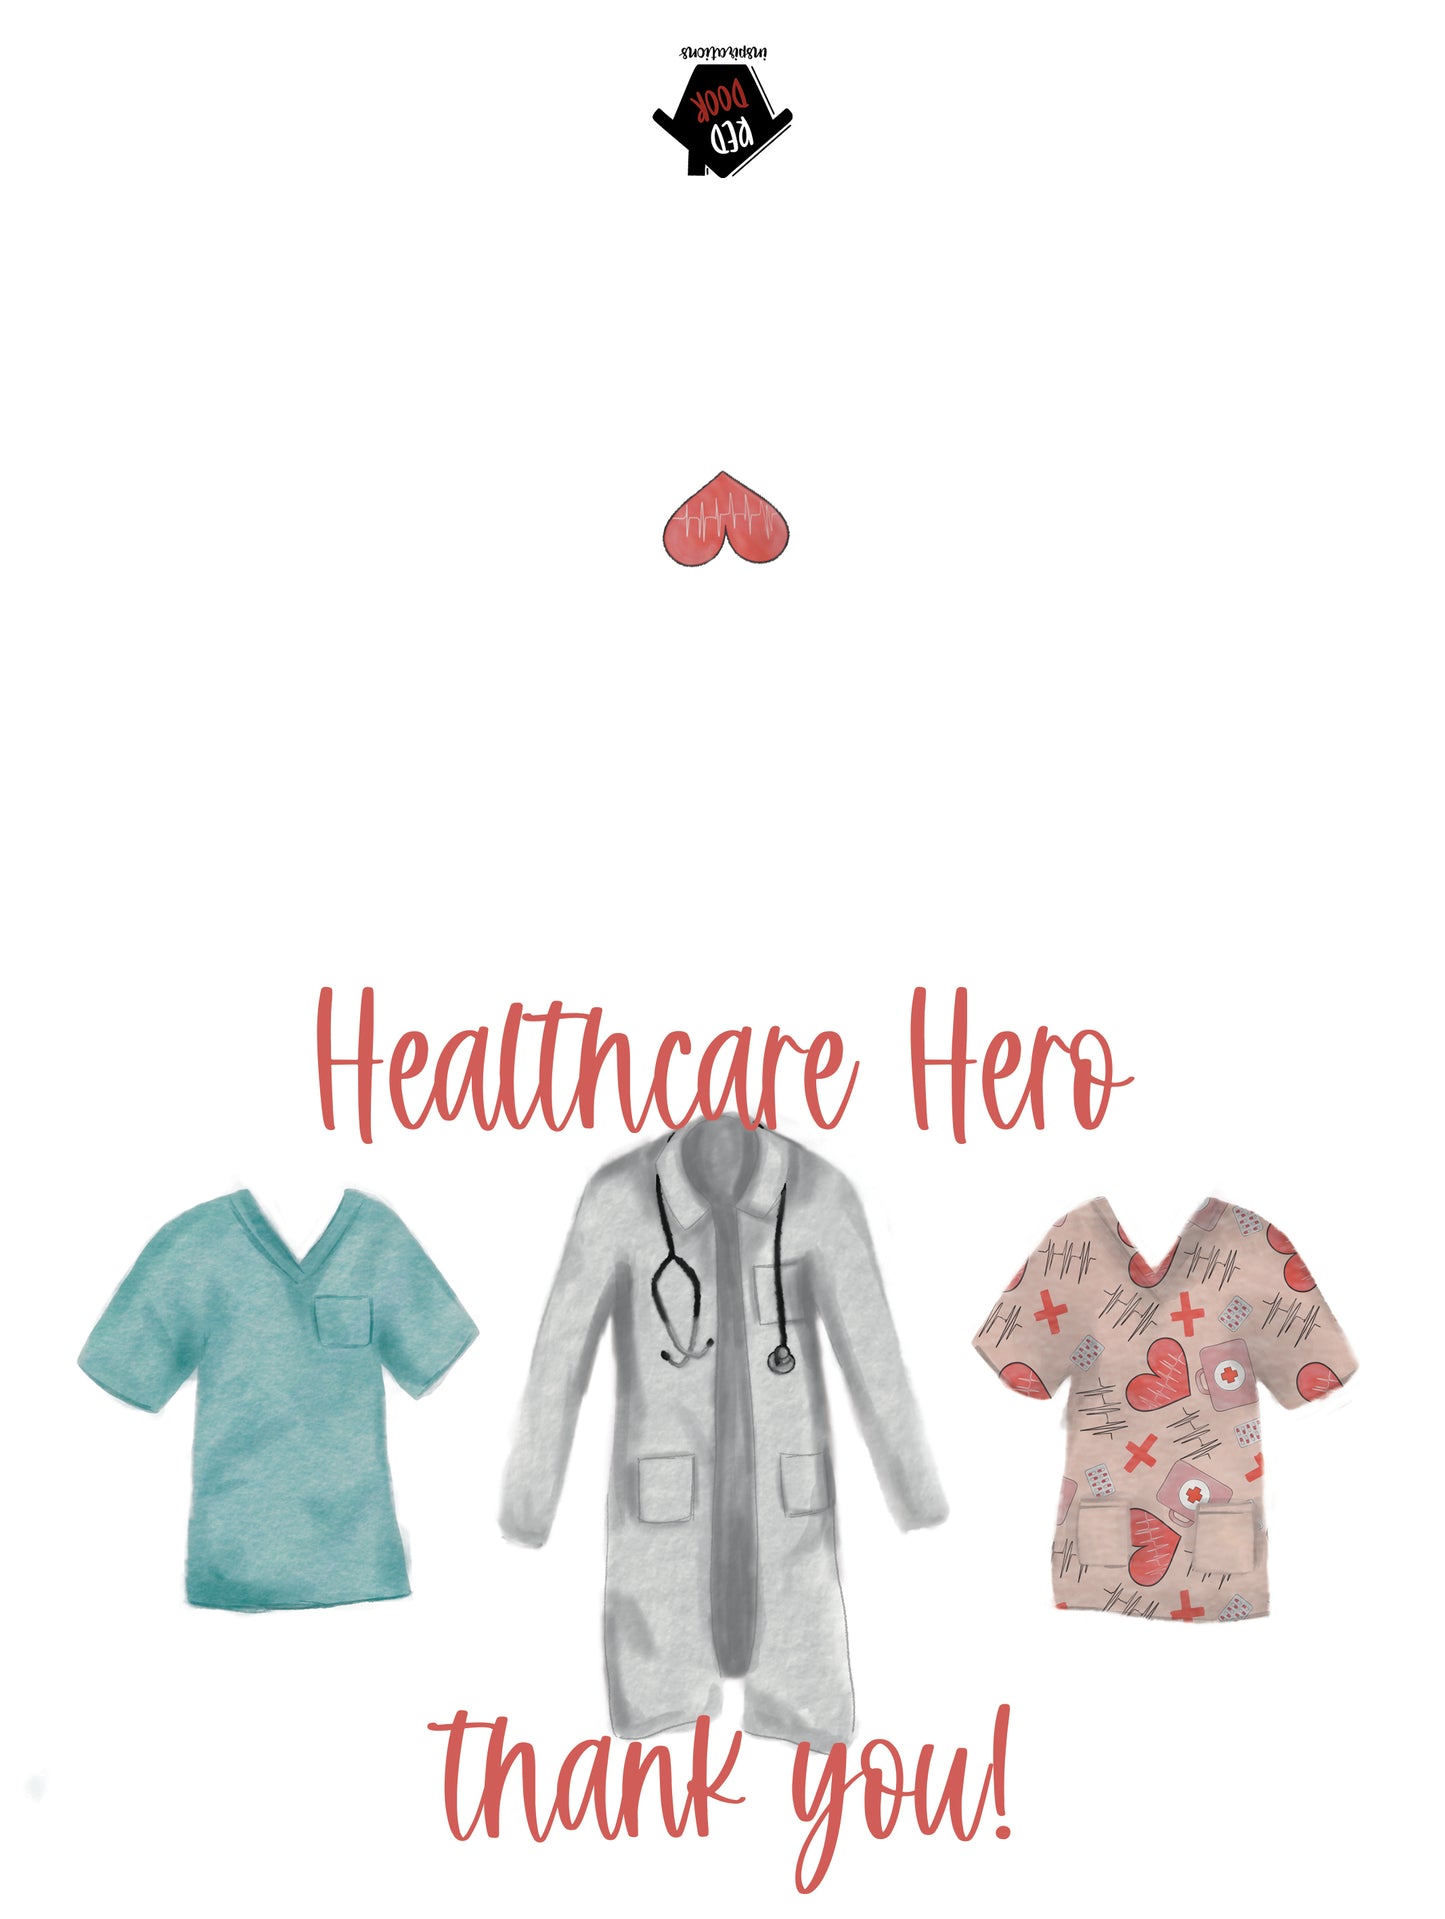 Healthcare Hero Thank You - Includes 25 cards